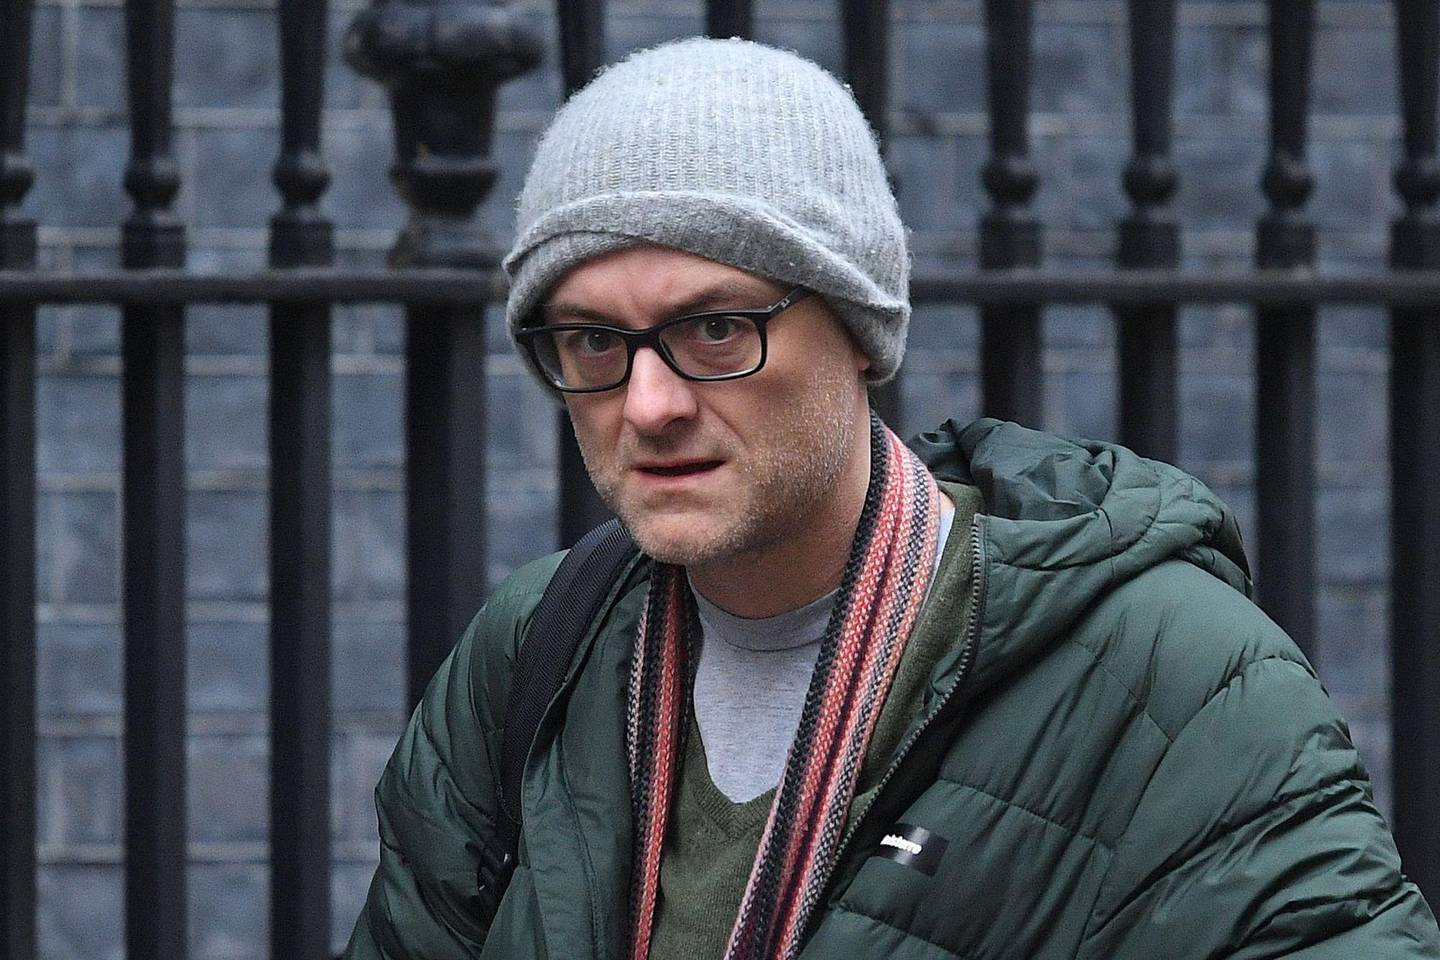 Number 10 special advisor Dominic Cummings arrives at 10 Downing Street in central London on December 16, 2019. - Prime Minister Boris Johnson vowed Saturday to repay the trust of former opposition voters who gave his Conservatives a mandate to take Britain out of the European Union next month. Johnson toured a leftist bastion once represented by former Labour leader Tony Blair in a bid to show his intent to unite the country after years of divisions over Brexit. (Photo by DANIEL LEAL-OLIVAS / AFP)